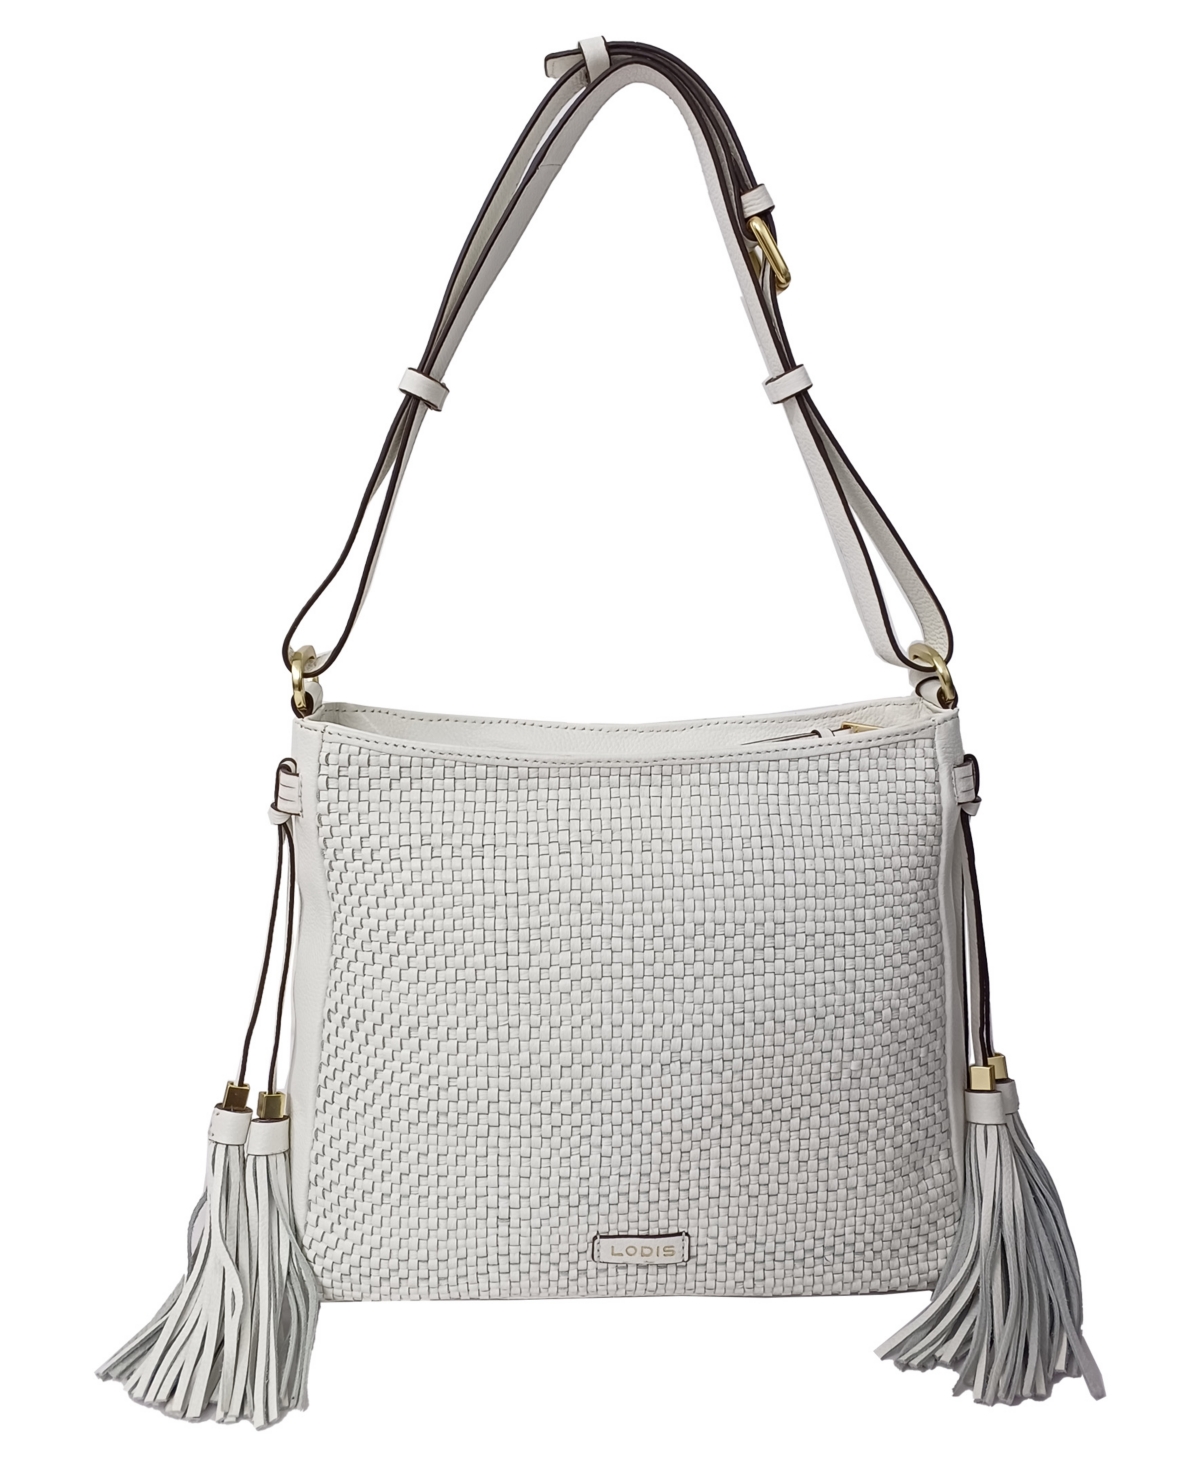 Lodis Lido Leather Shoulder Bag In White